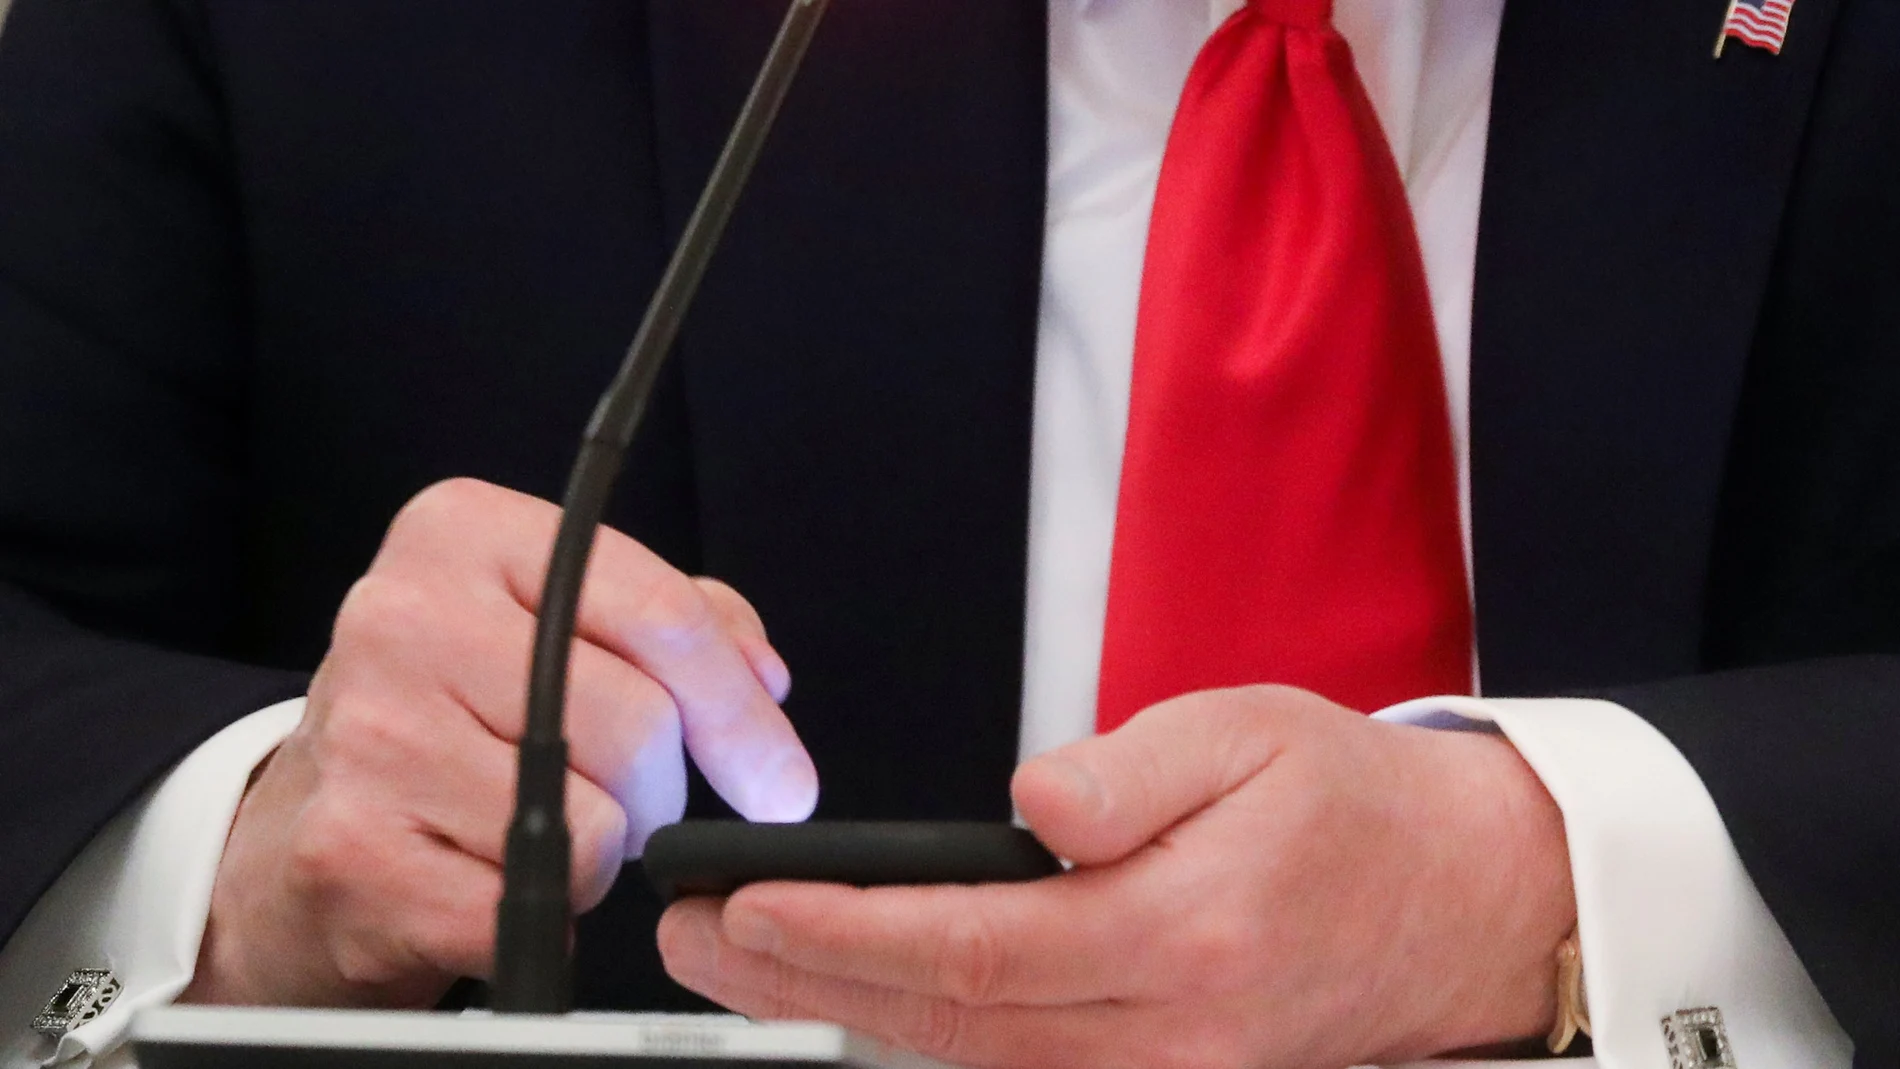 U.S. President Donald Trump taps the screen on a mobile phone at the approximate time a tweet was released from his Twitter account, during a roundtable discussion on the reopening of small businesses in the State Dining Room at the White House in Washington, U.S., June 18, 2020. REUTERS/Leah Millis